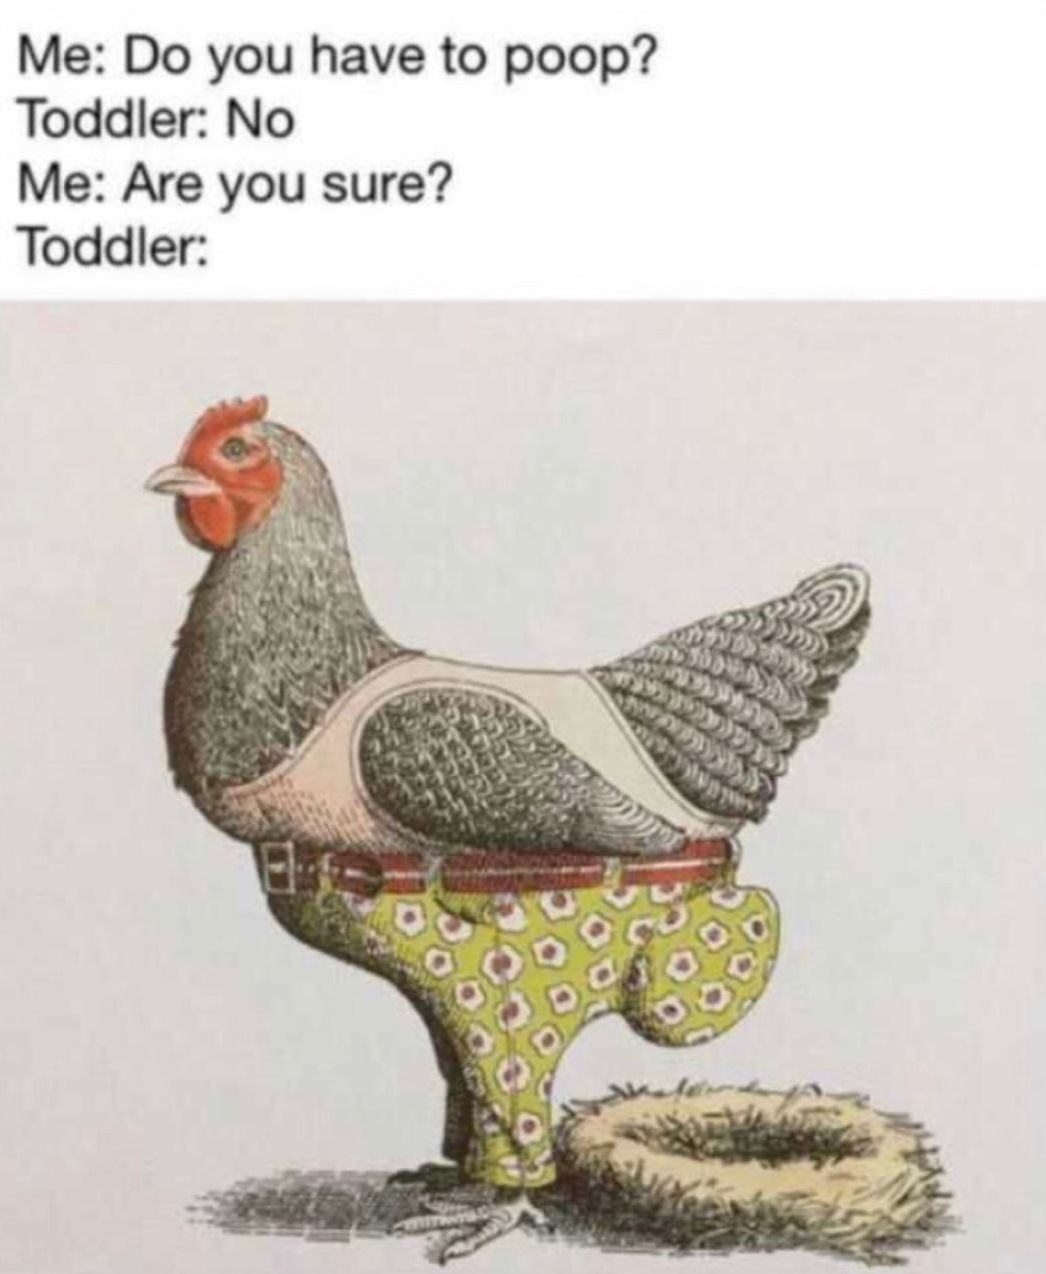 chicken toddler poop meme - Me Do you have to poop? Toddler No Me Are you sure? Toddler